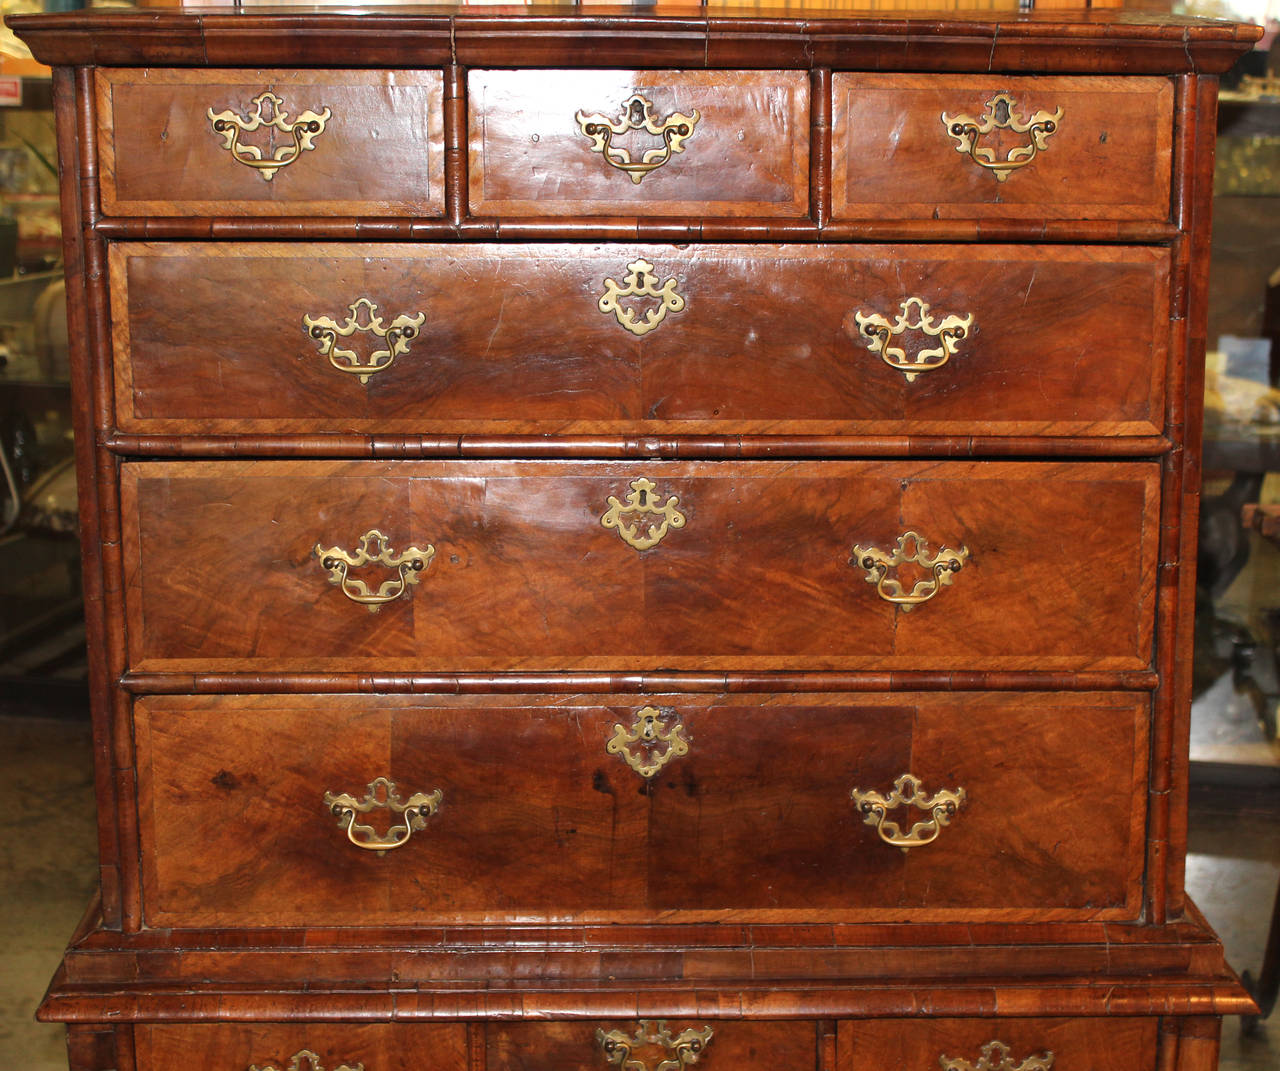 An 18th century English high chest or highboy in burled and banded veneer, cabriole legs terminating with hooves, and a nicely carved apron. The top show three small fitted drawers over three large drawers. The base shows one small fitted center